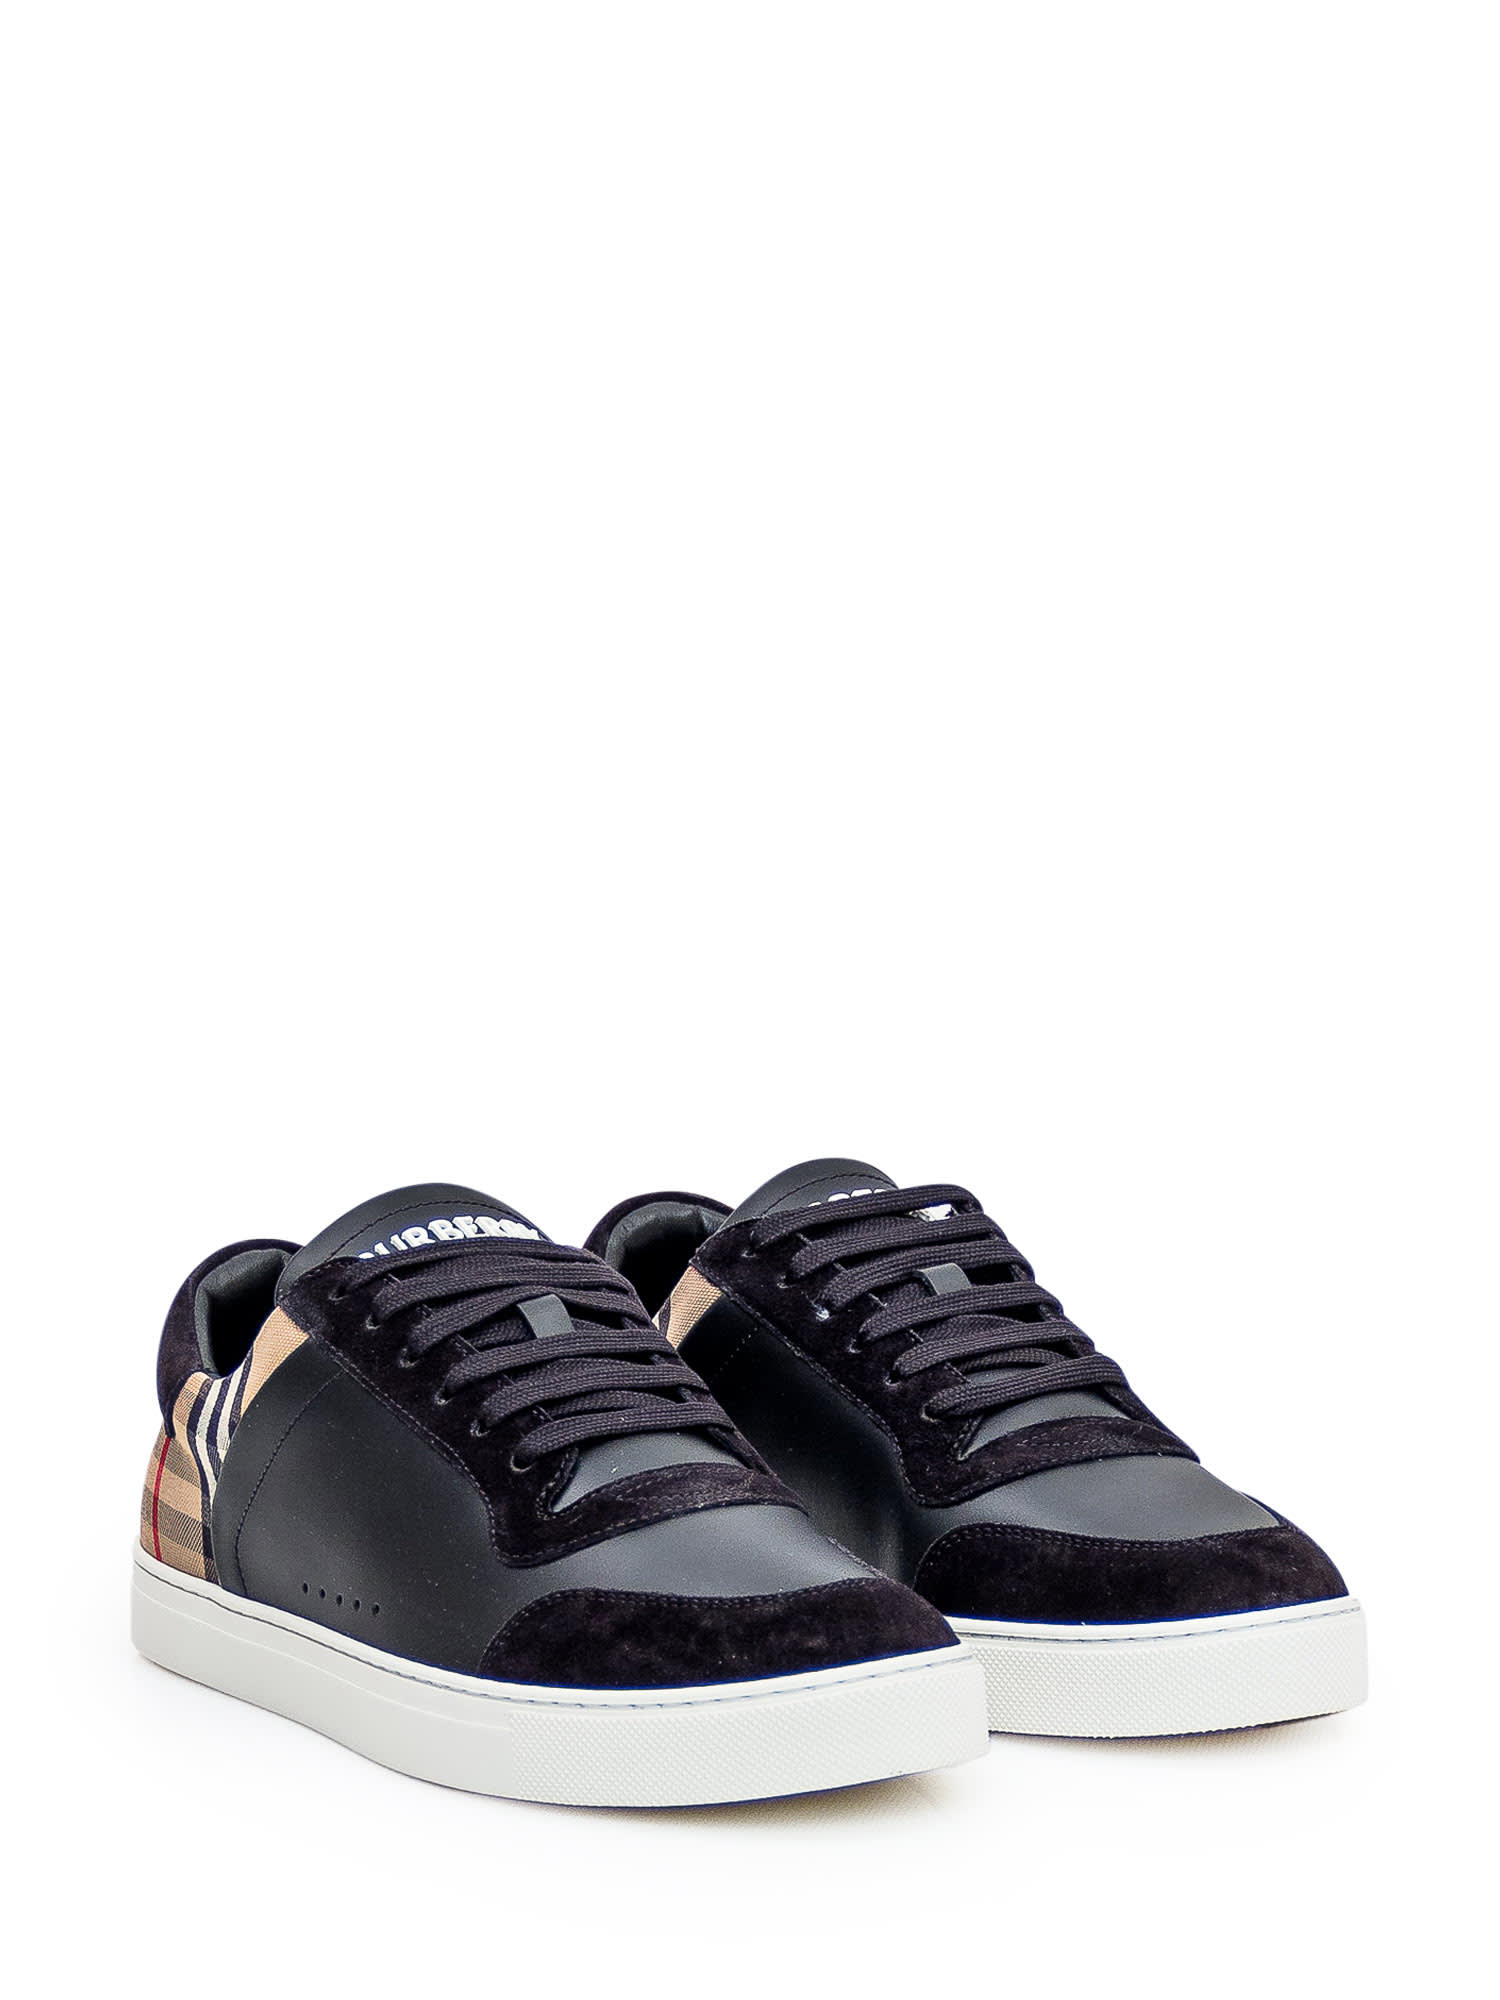 Shop Burberry Check Sneaker In A7626